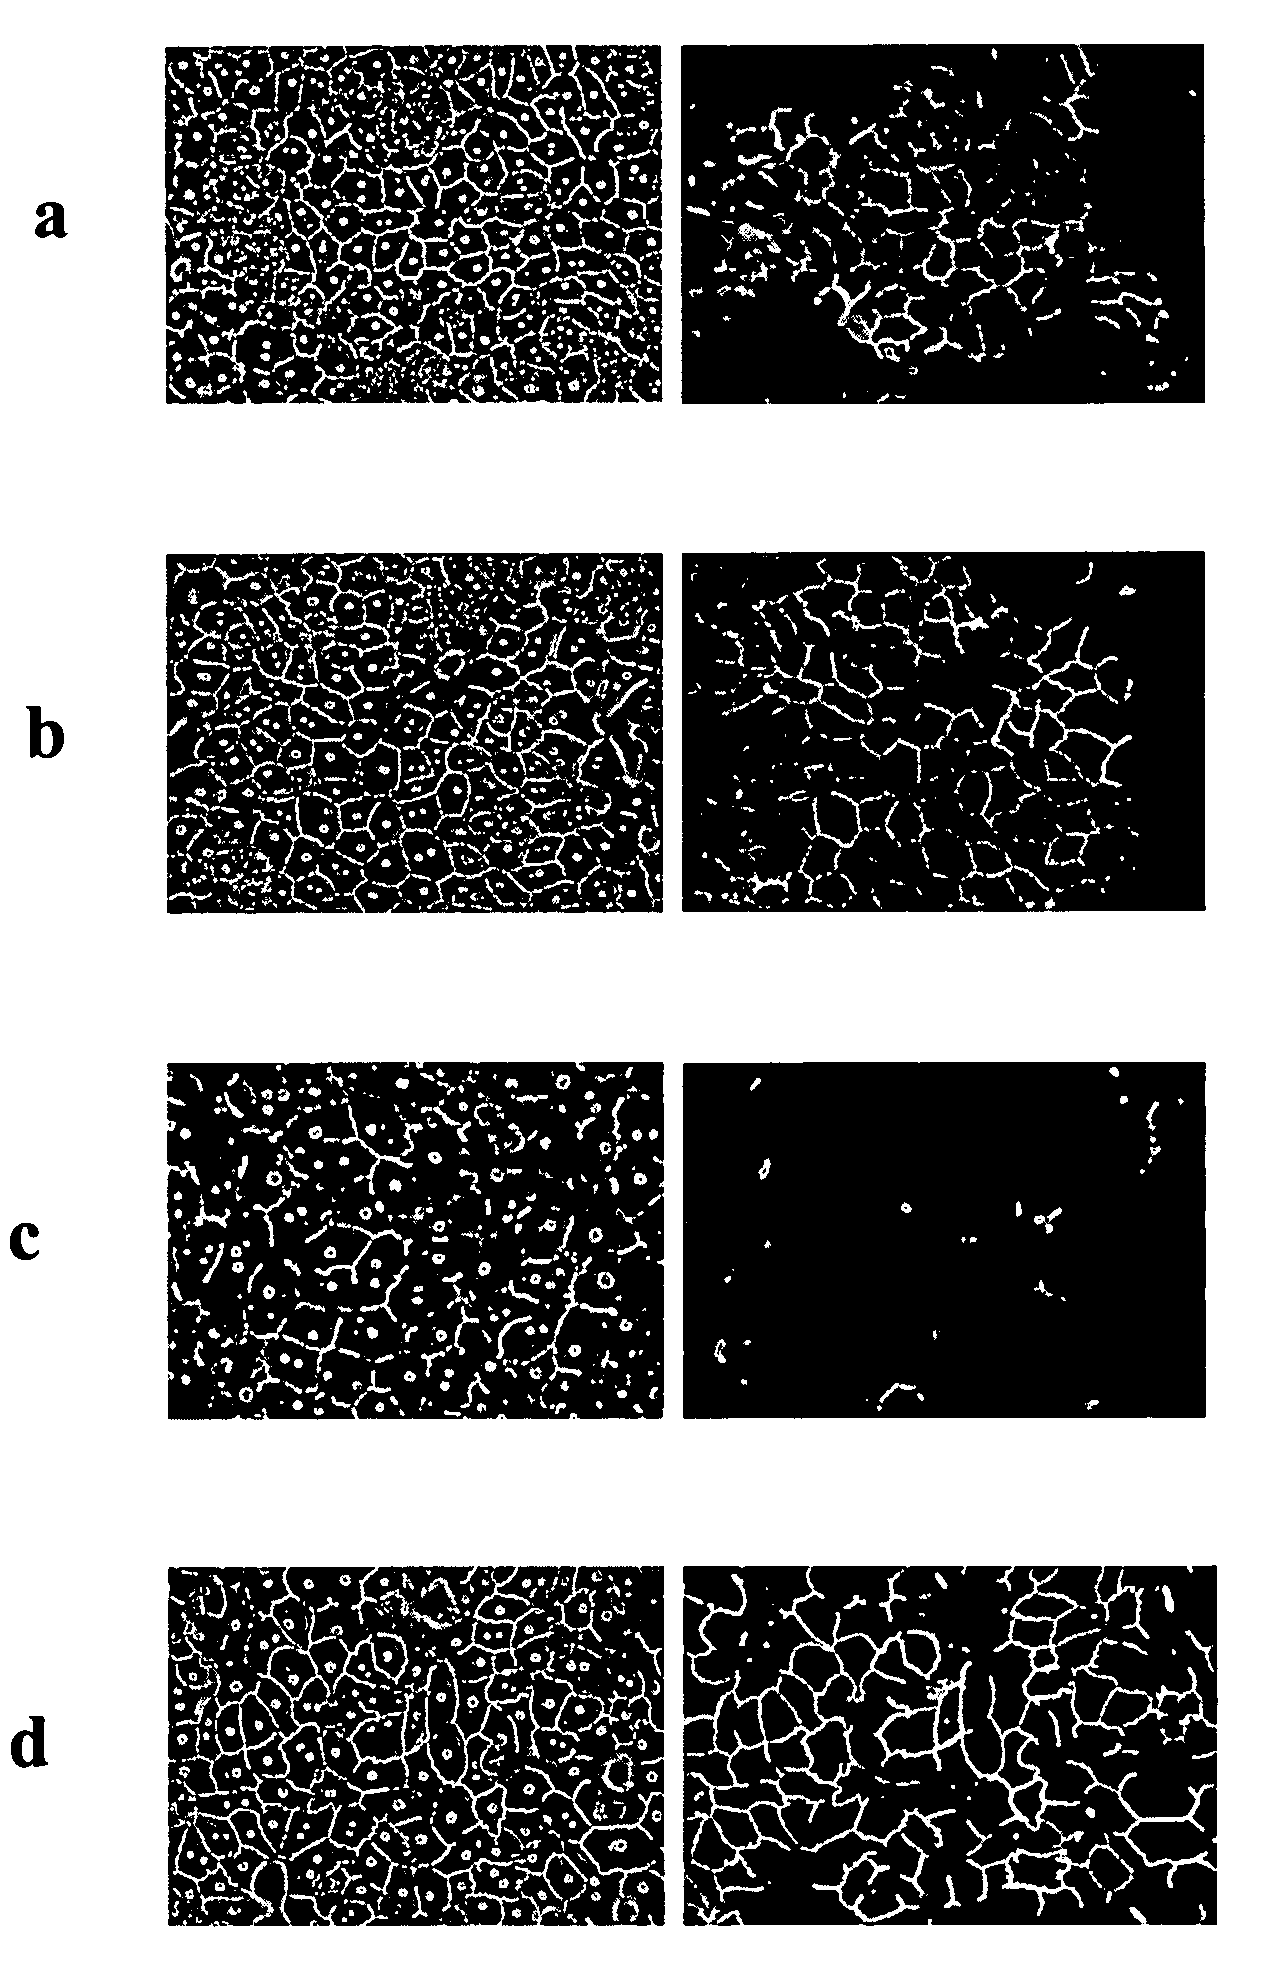 Method of screening candidate compounds for susceptibility to biliary excretion